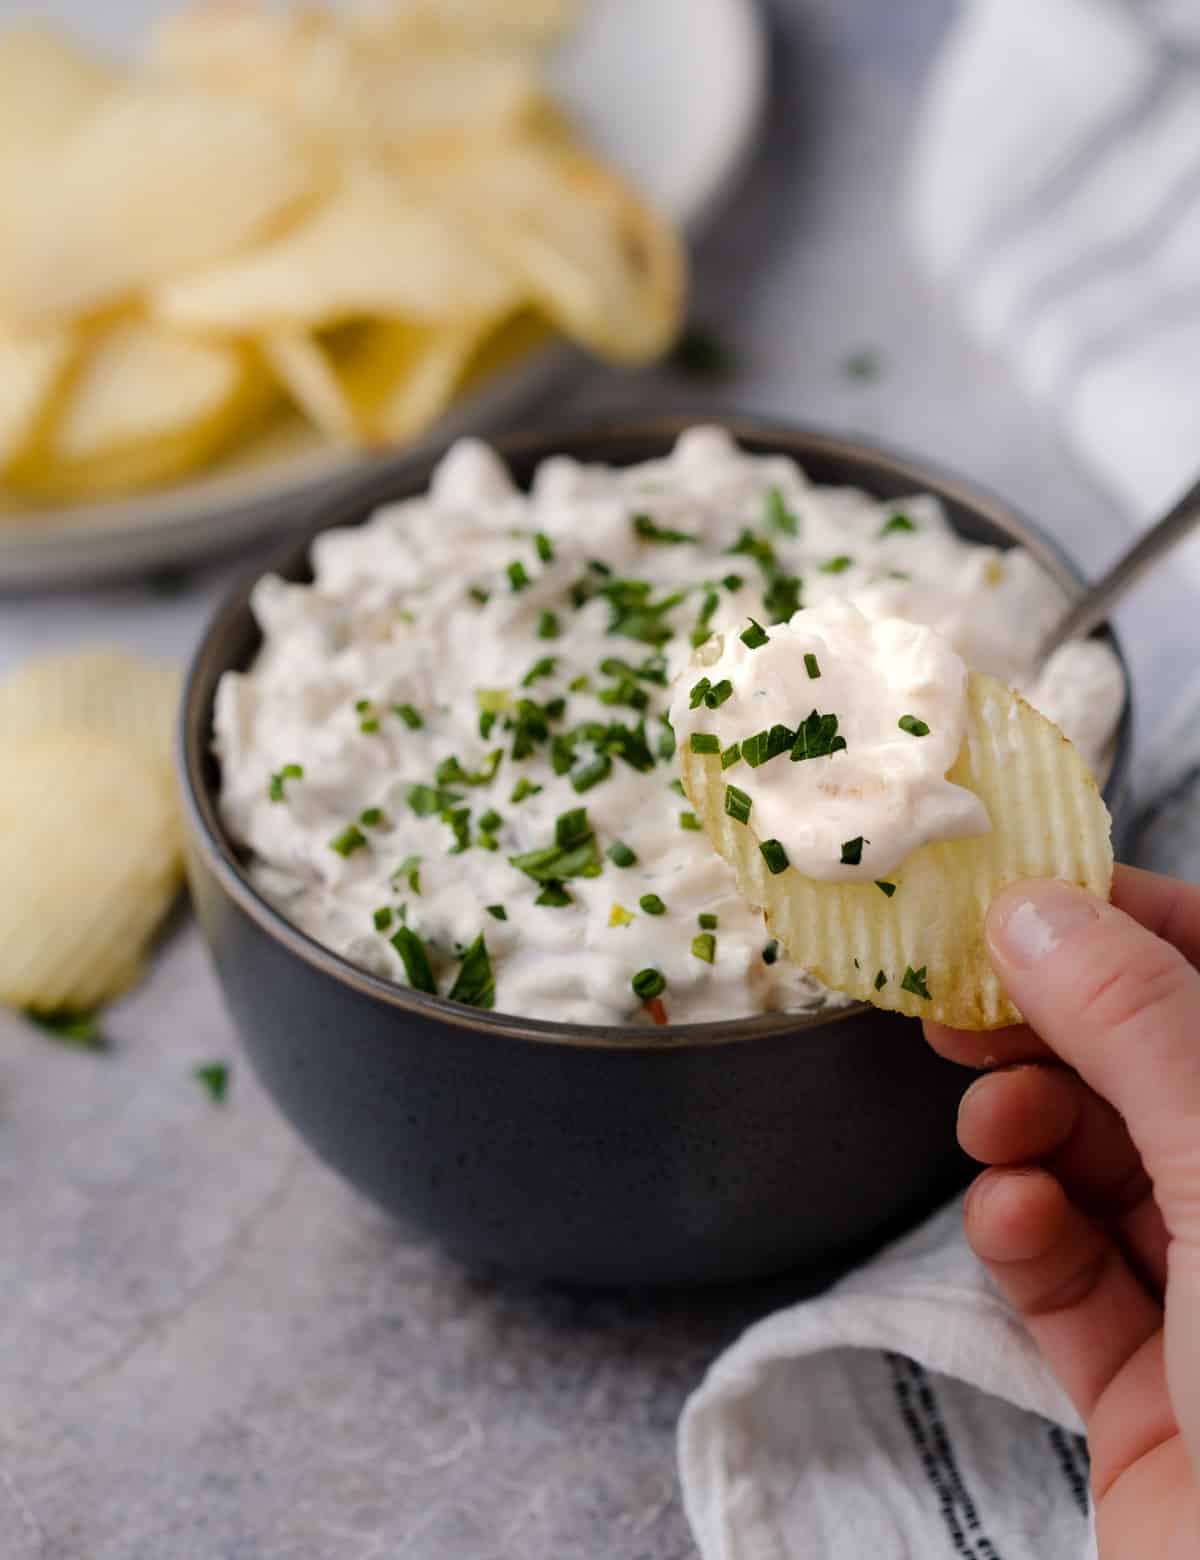 Dipping a chip into smoked French onion dip.